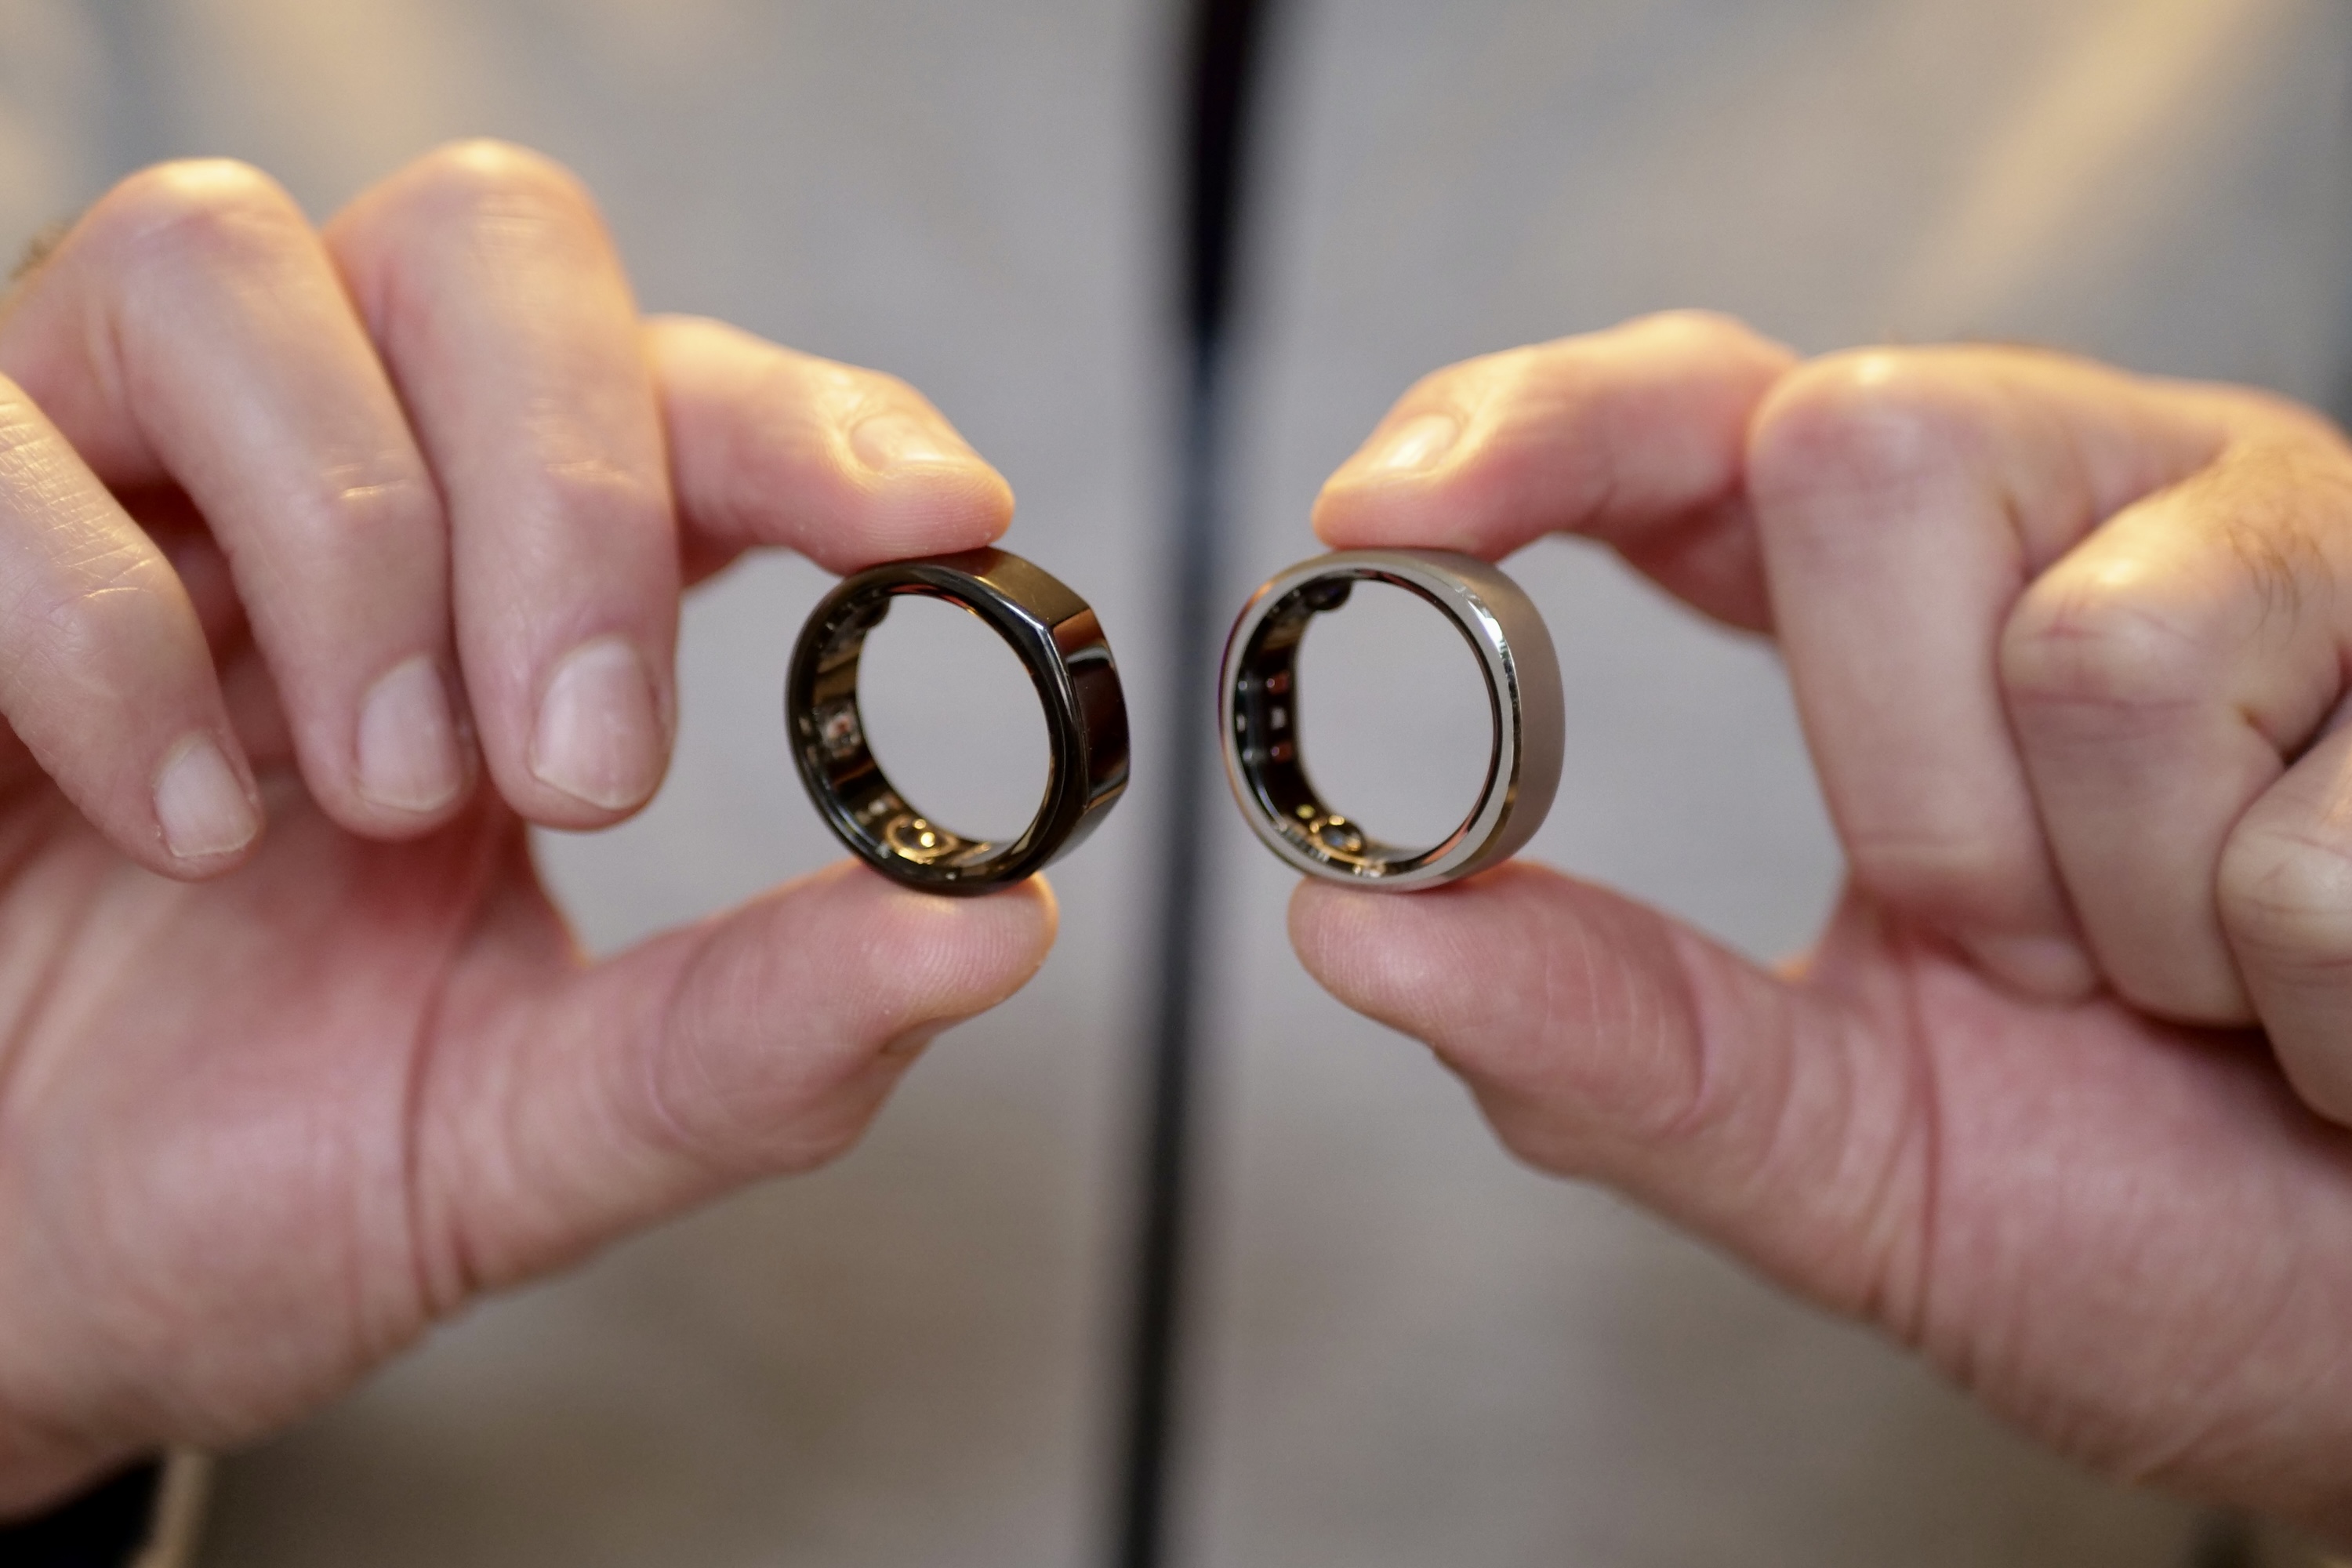 7 things you need to know before buying a smart ring